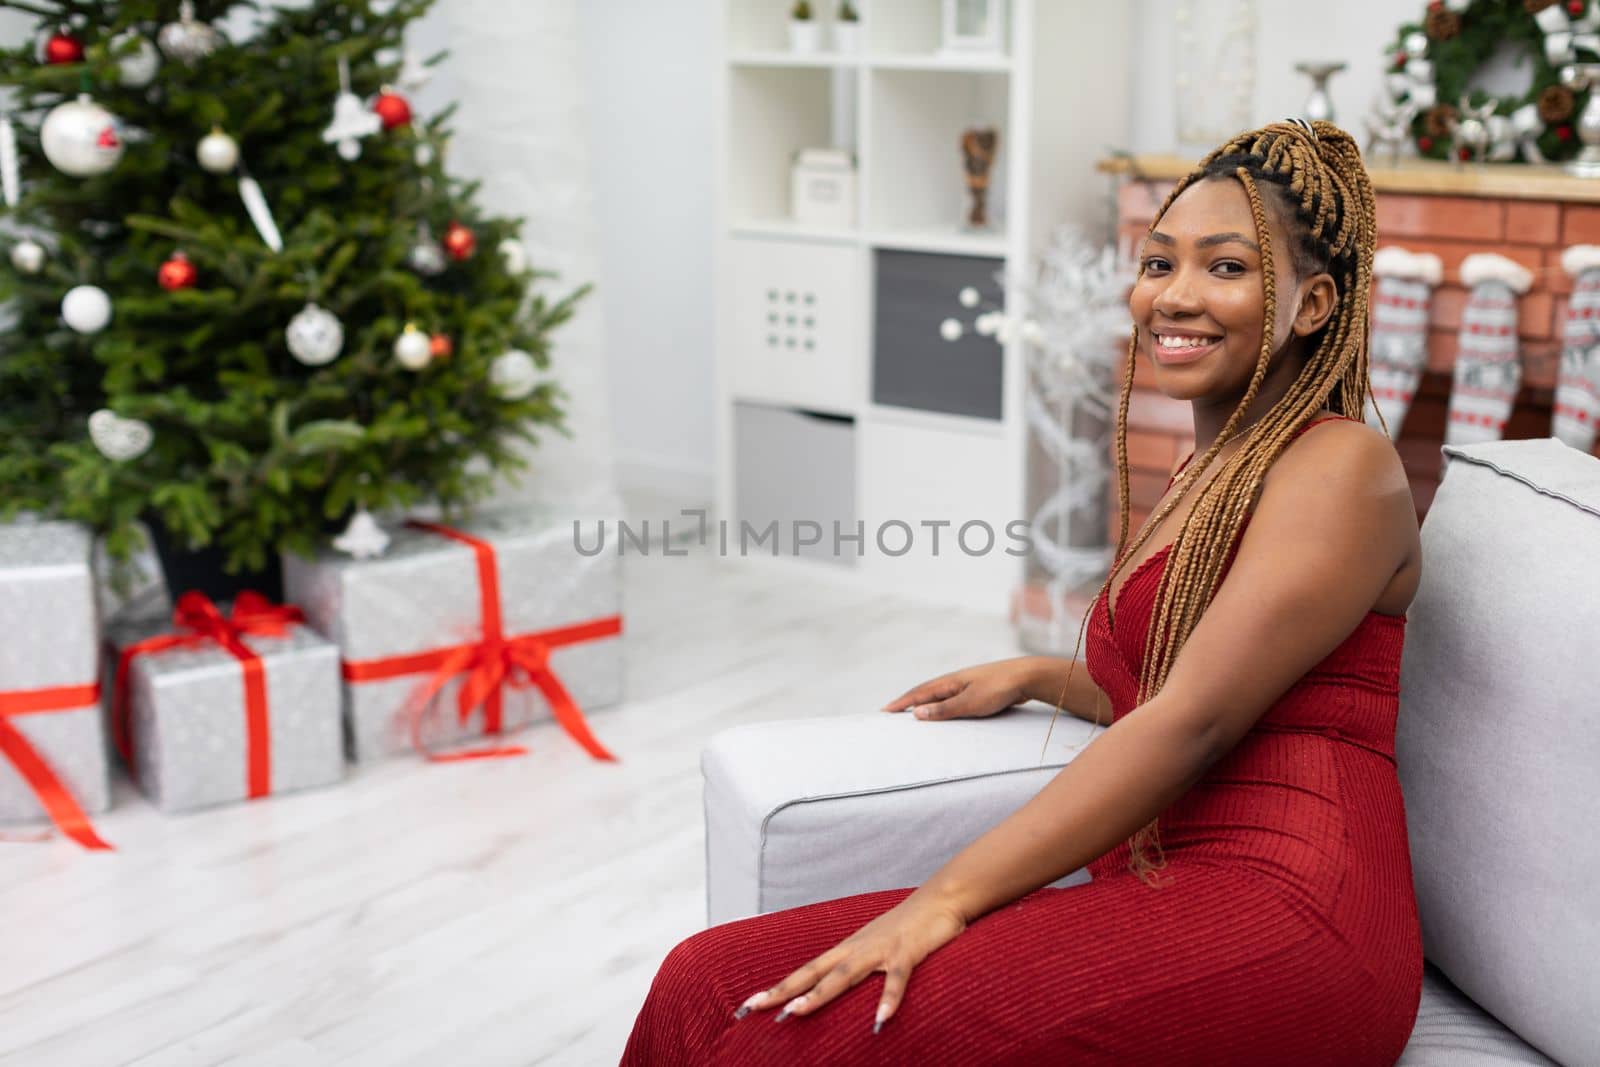 Gifts decorated with a red bow. An African woman waits for invited guests. A few hours before Christmas Eve. Christmas decoration.